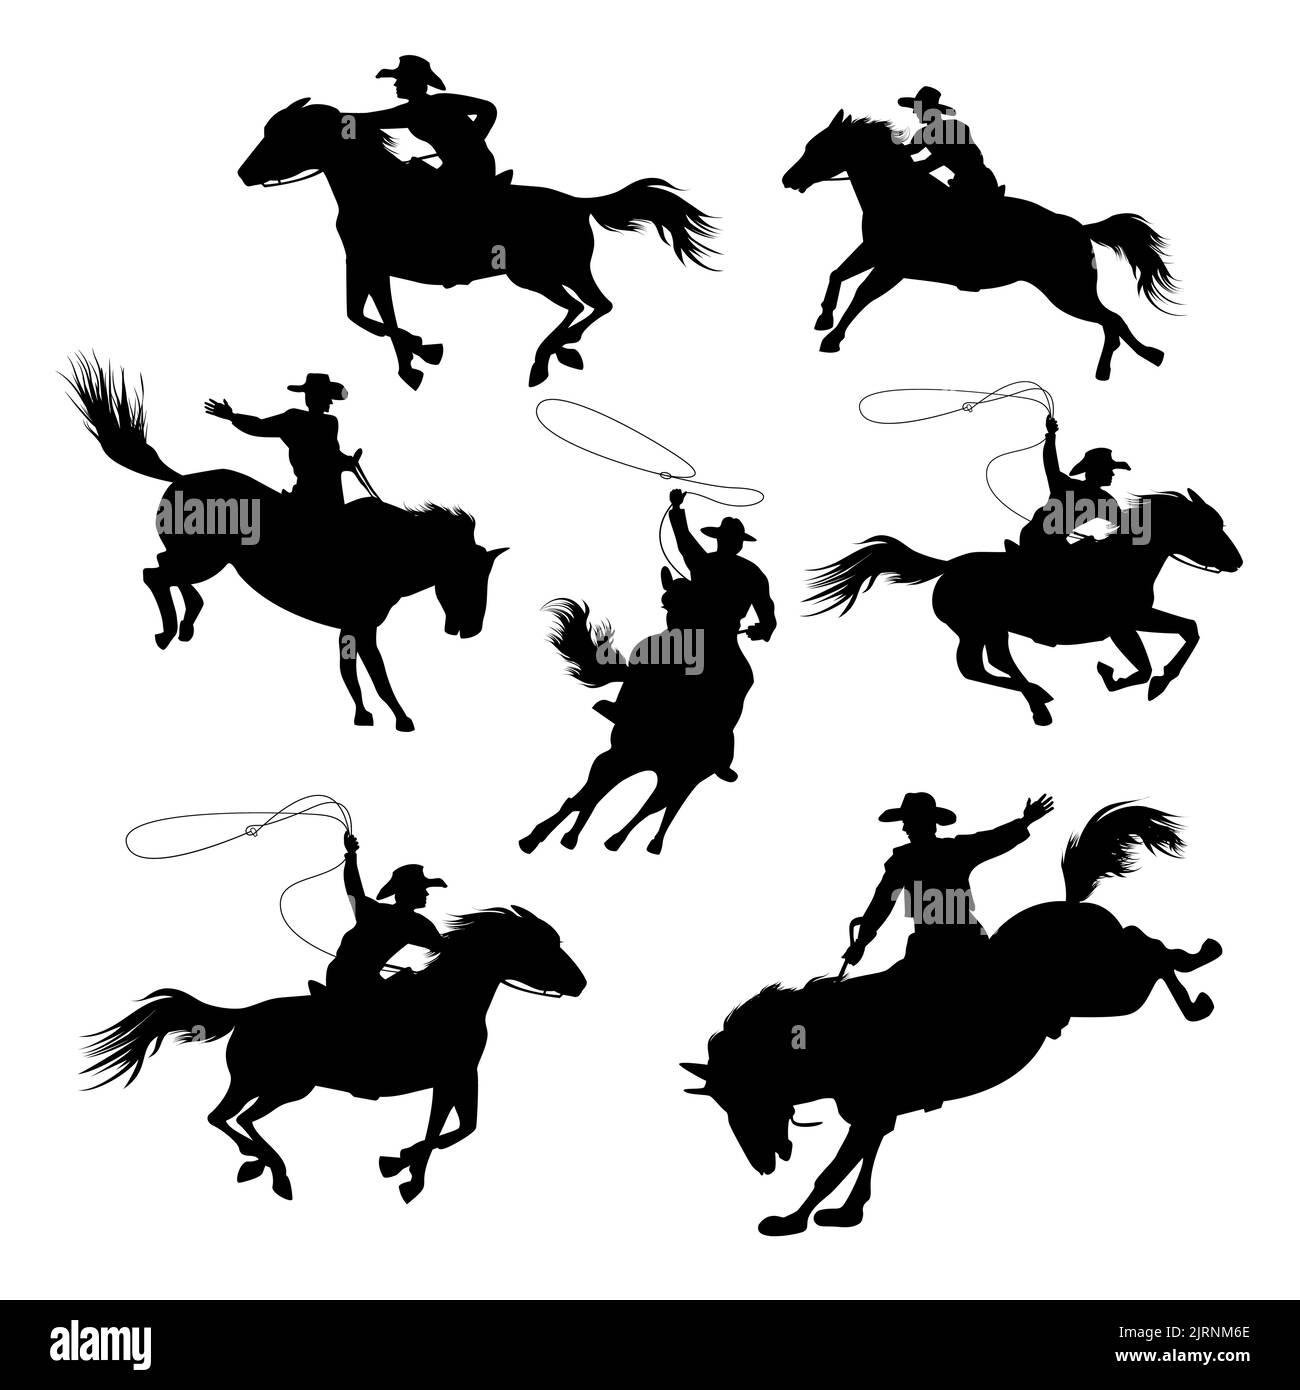 Cowboy riding a horse. Rider skill. Silhouettes of a cowboy with a horse. Man and horse. Stock Vector